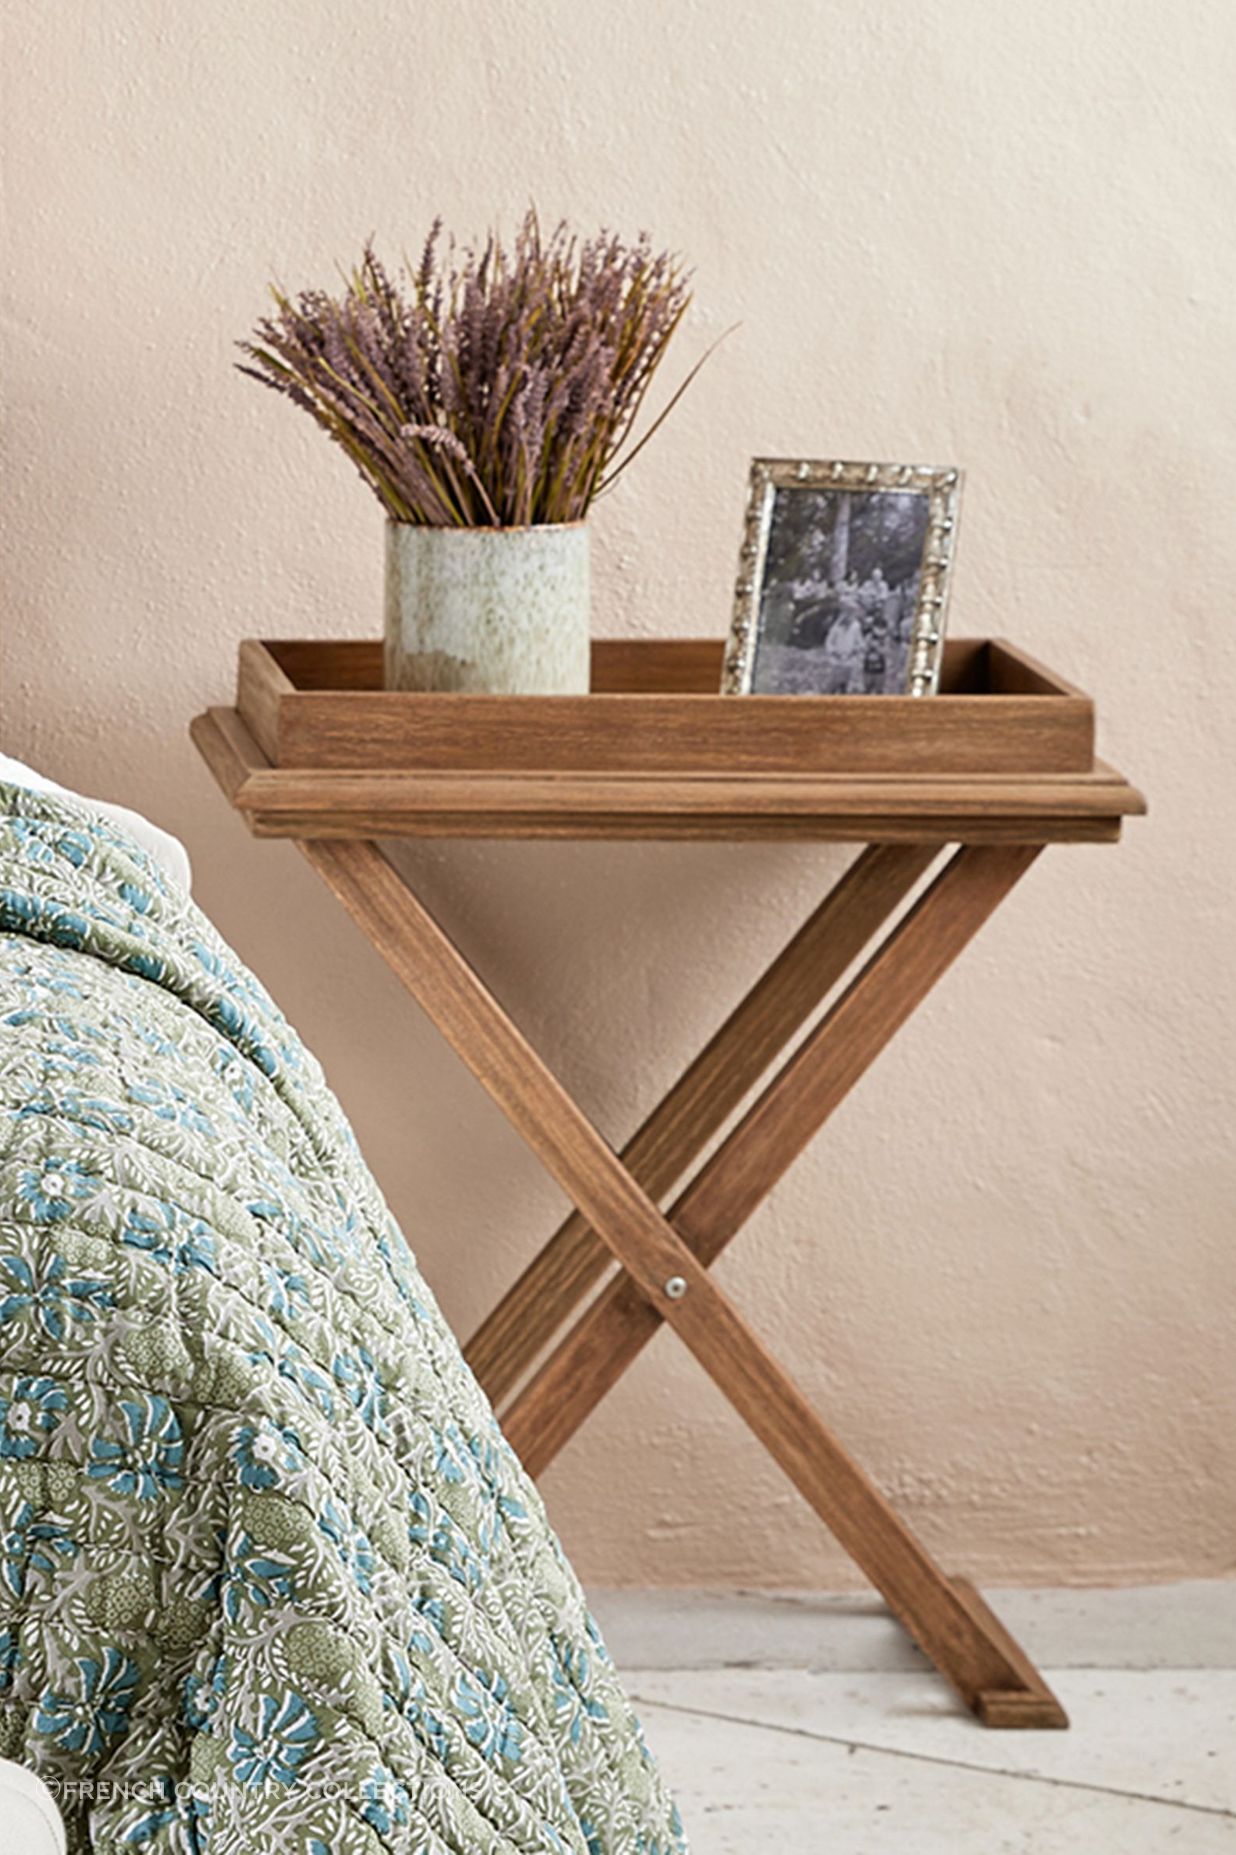 Exuding rustic charm and earthy tones, the cross leg tray table stands as a unique blend of functionality and style.